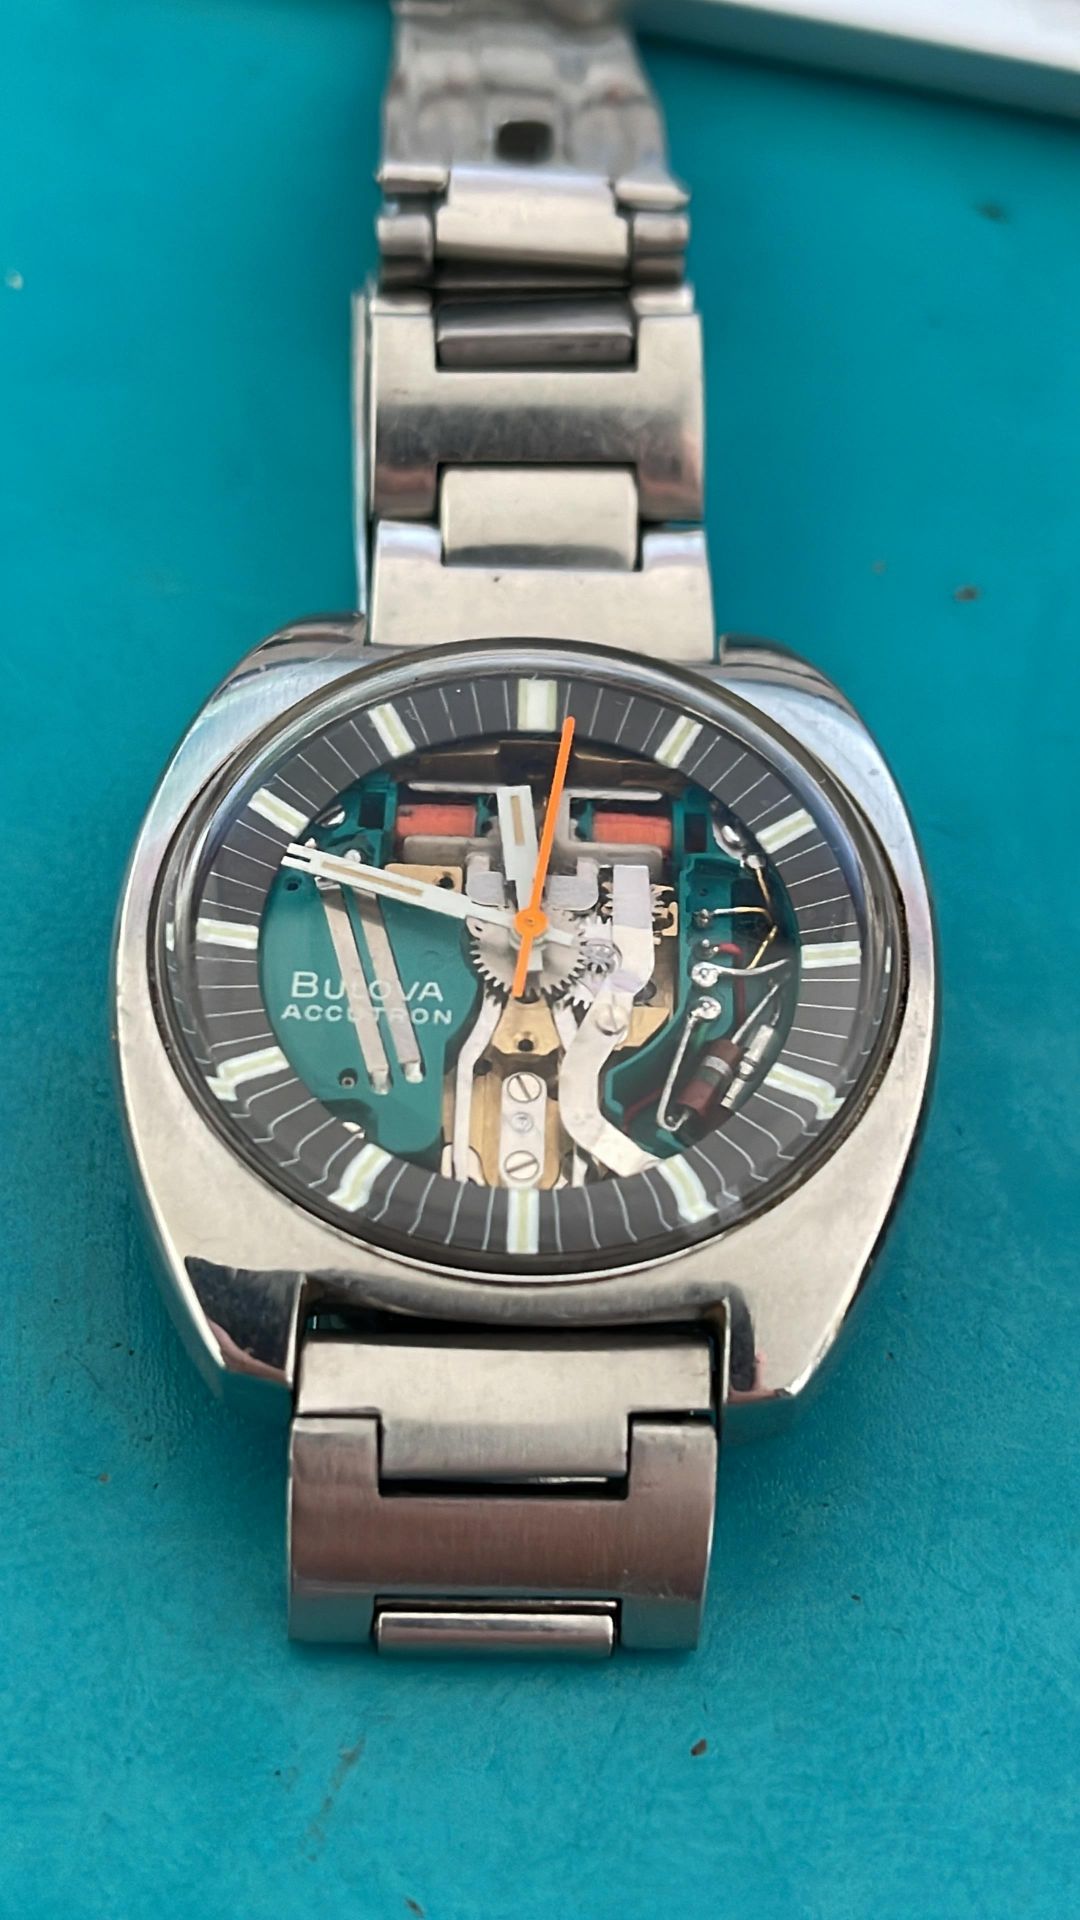 The Bulova Accutron space view watch fully working - Image 3 of 4